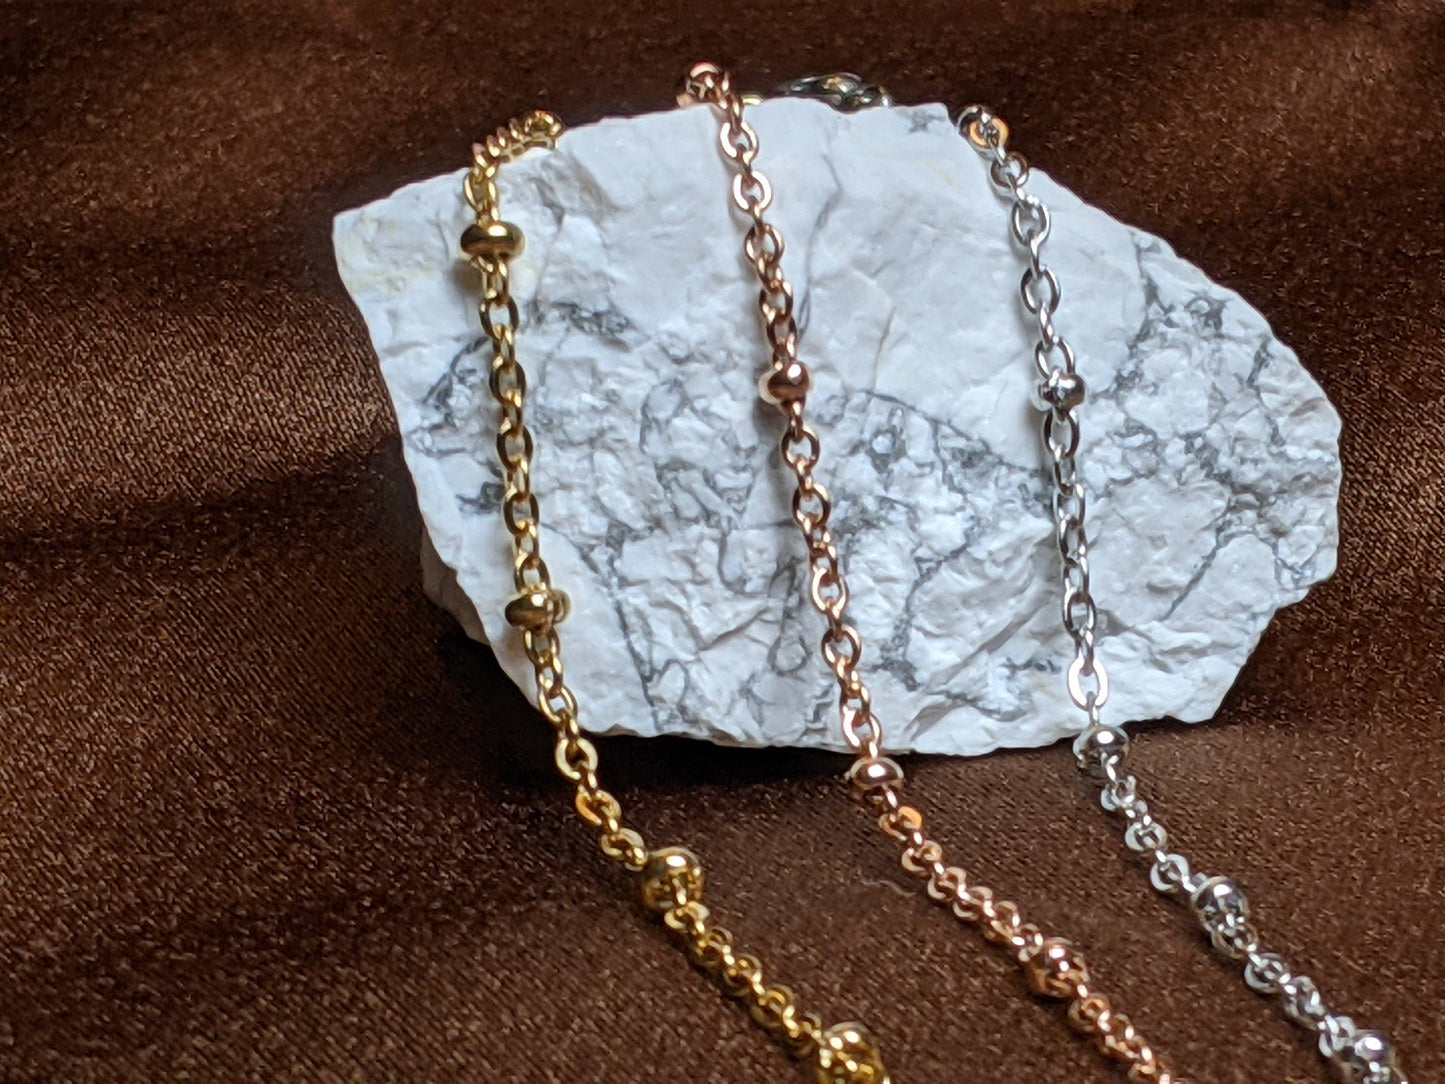 Necklaces - 30" & 24” Long,  Rose Gold Plated, Titanium Plated, 18K Gold Plated Balled Stainless Steel Flat Chain For Men, Women